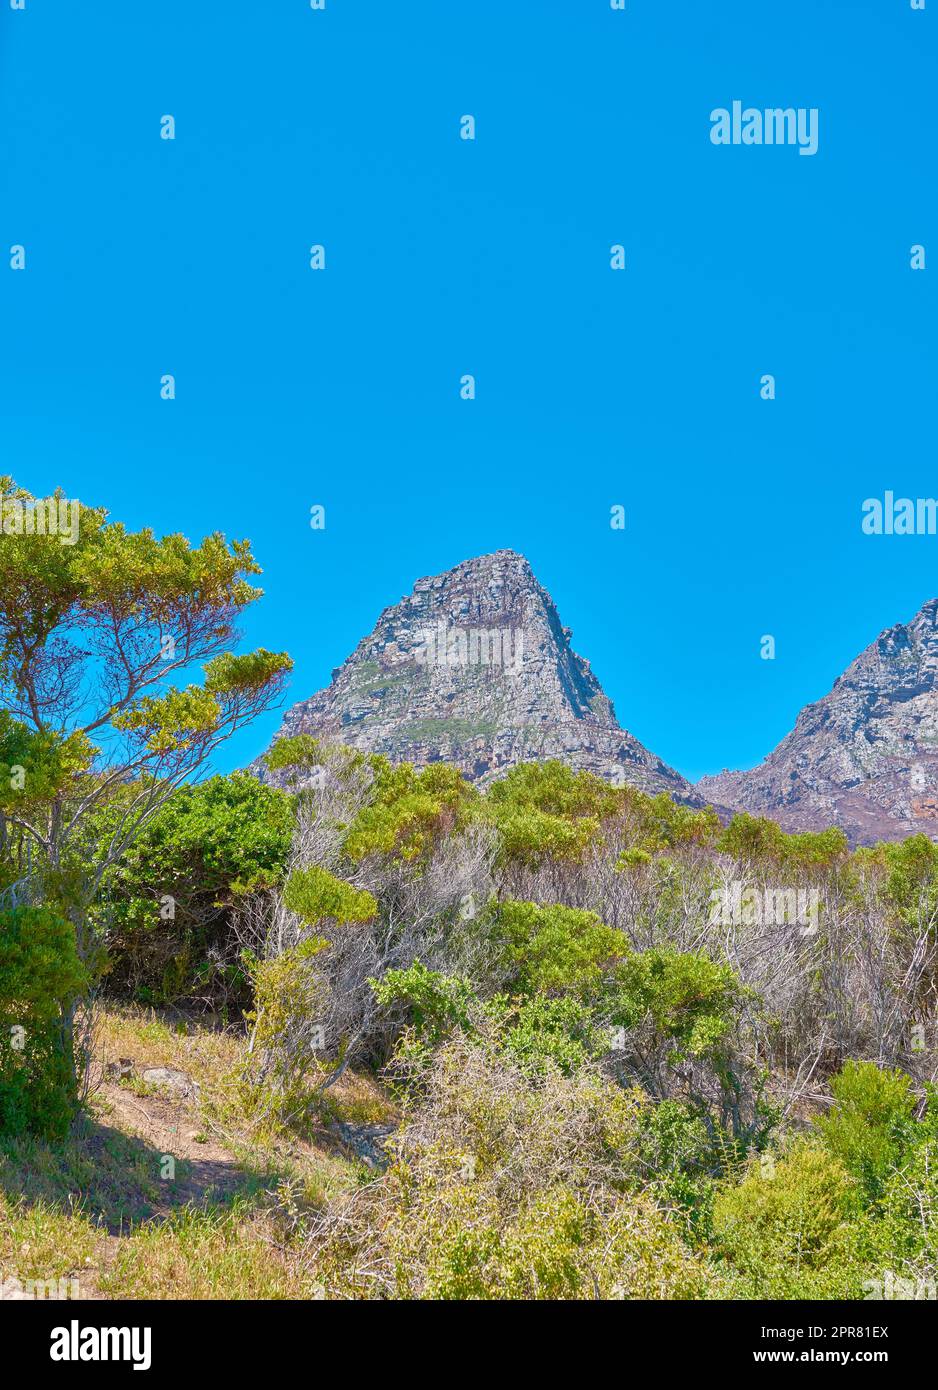 Scenic mountain landscape view with blue sky with copy space of Twelve Apostles in Cape Town, South Africa. Famous steep hiking, trekking terrain with growing trees and bushes. Travel and tourism Stock Photo